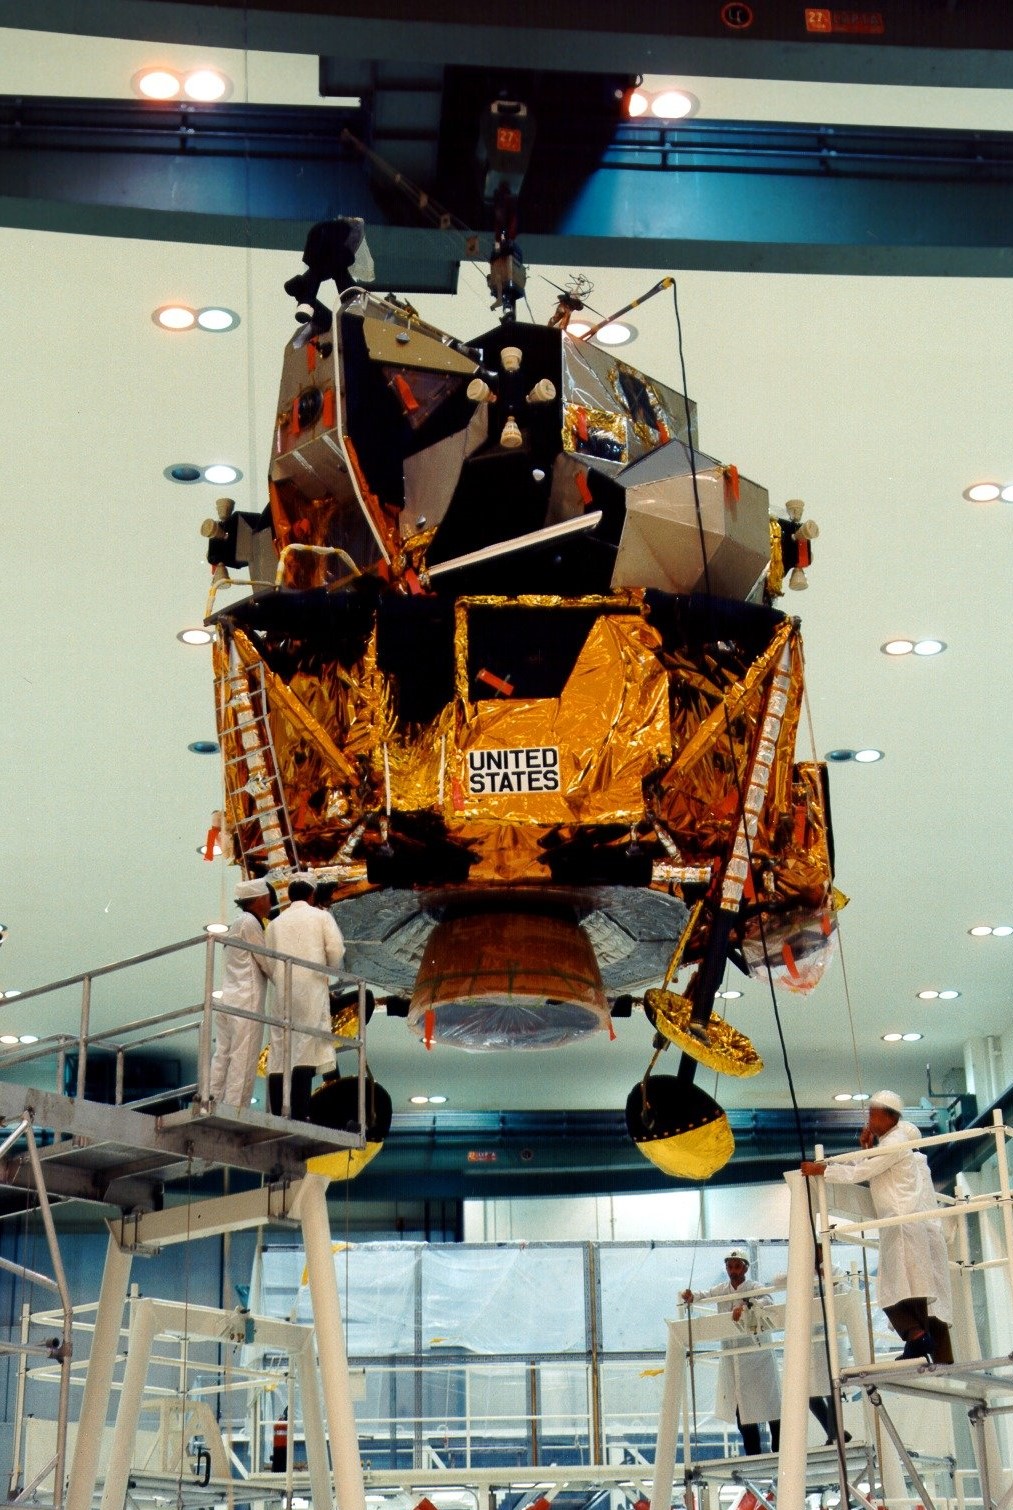 In the Manned Spacecraft Operations Building (MSOB) at NASA's Kennedy Space Center, workers finish attaching the landing gear to the Apollo 12 Lunar Module (LM)